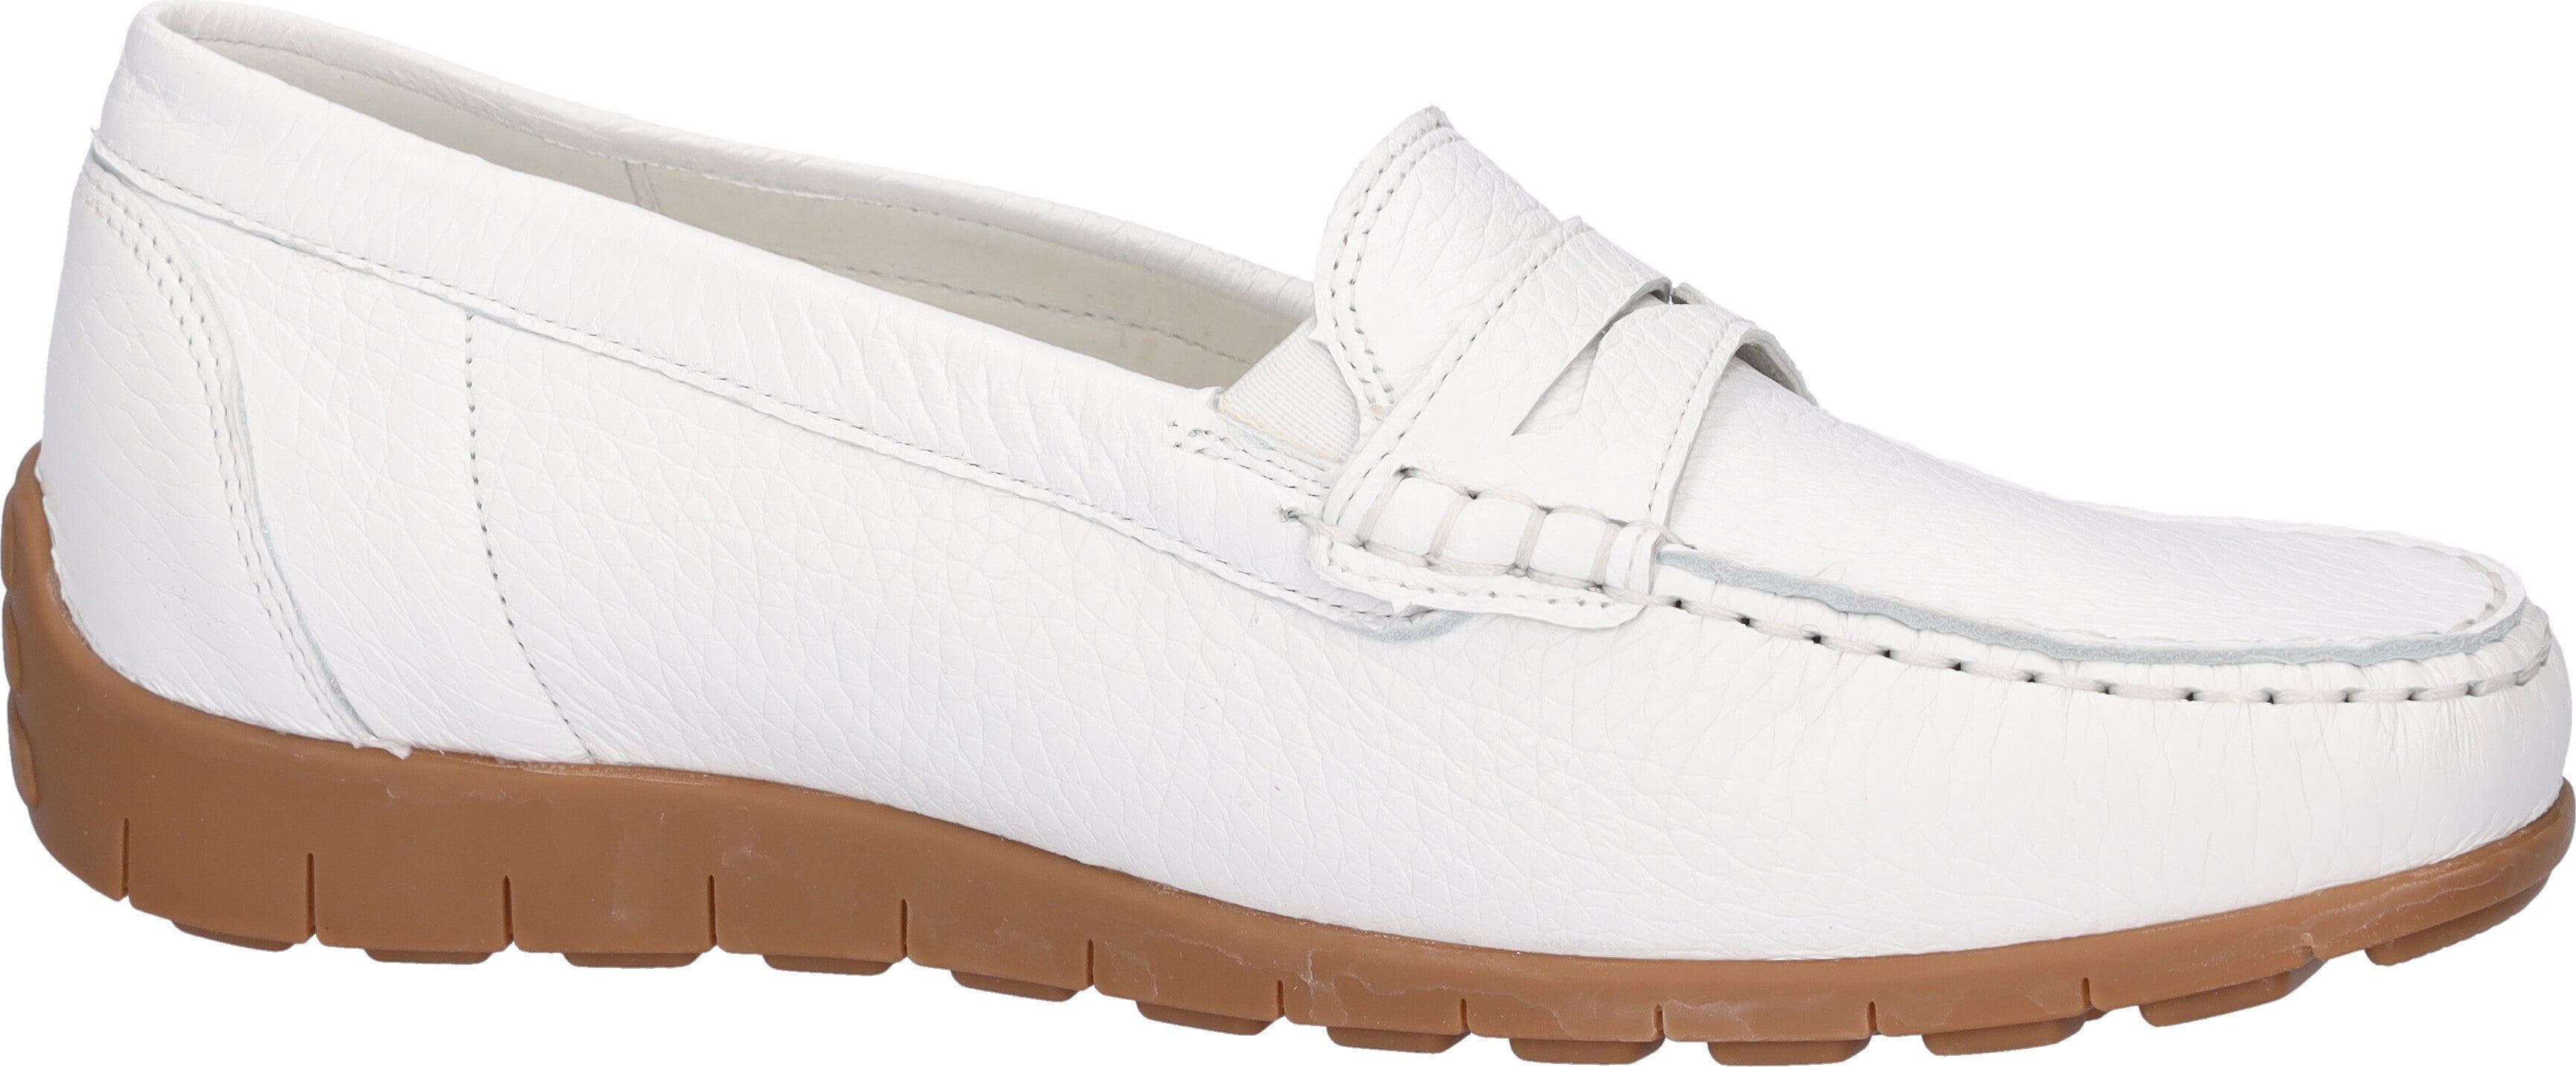 Waldlaufer 785502 199 150 H-Lucy Ladies White Leather Arch Support Slip On Loafers